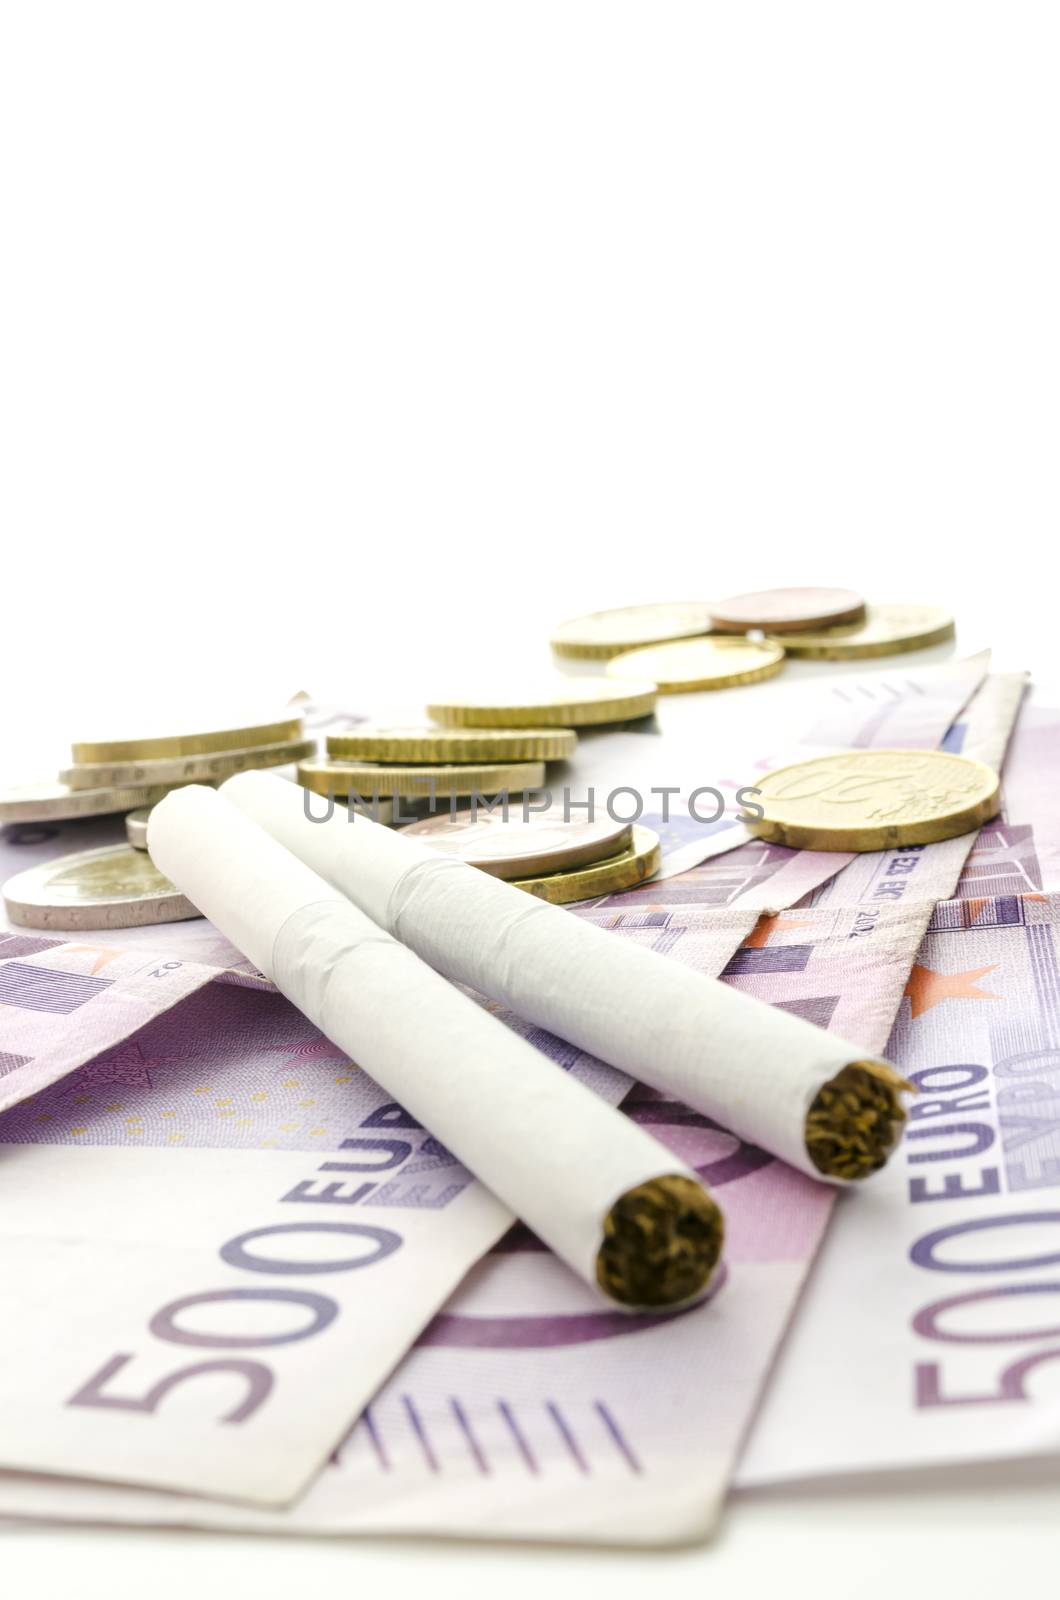 Cigarettes on Euro banknotes representing how expensive smoking habit is.